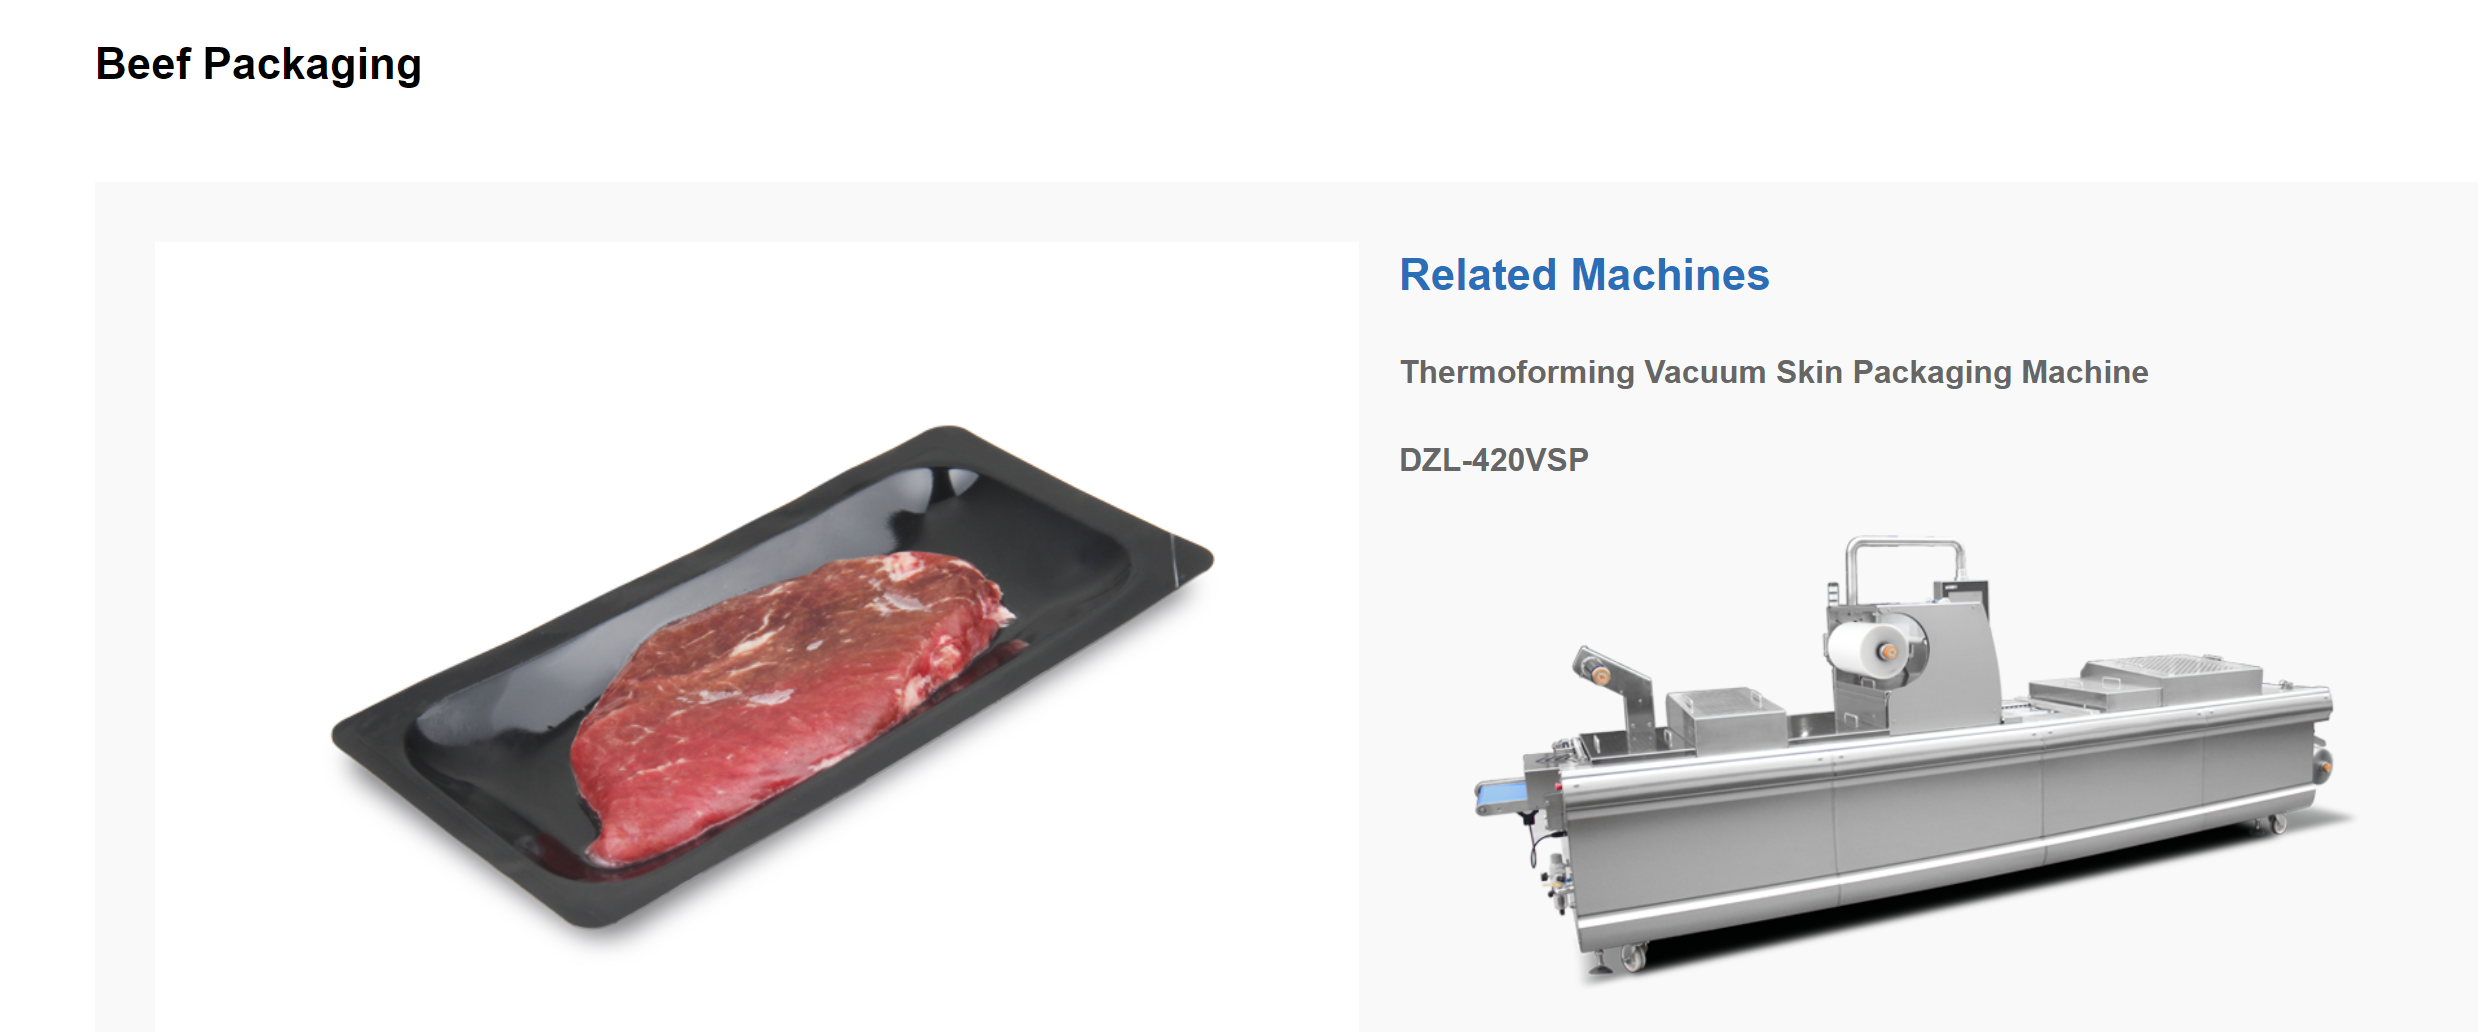 How to  use Meat Thermoforming Vacuum Packaging machine